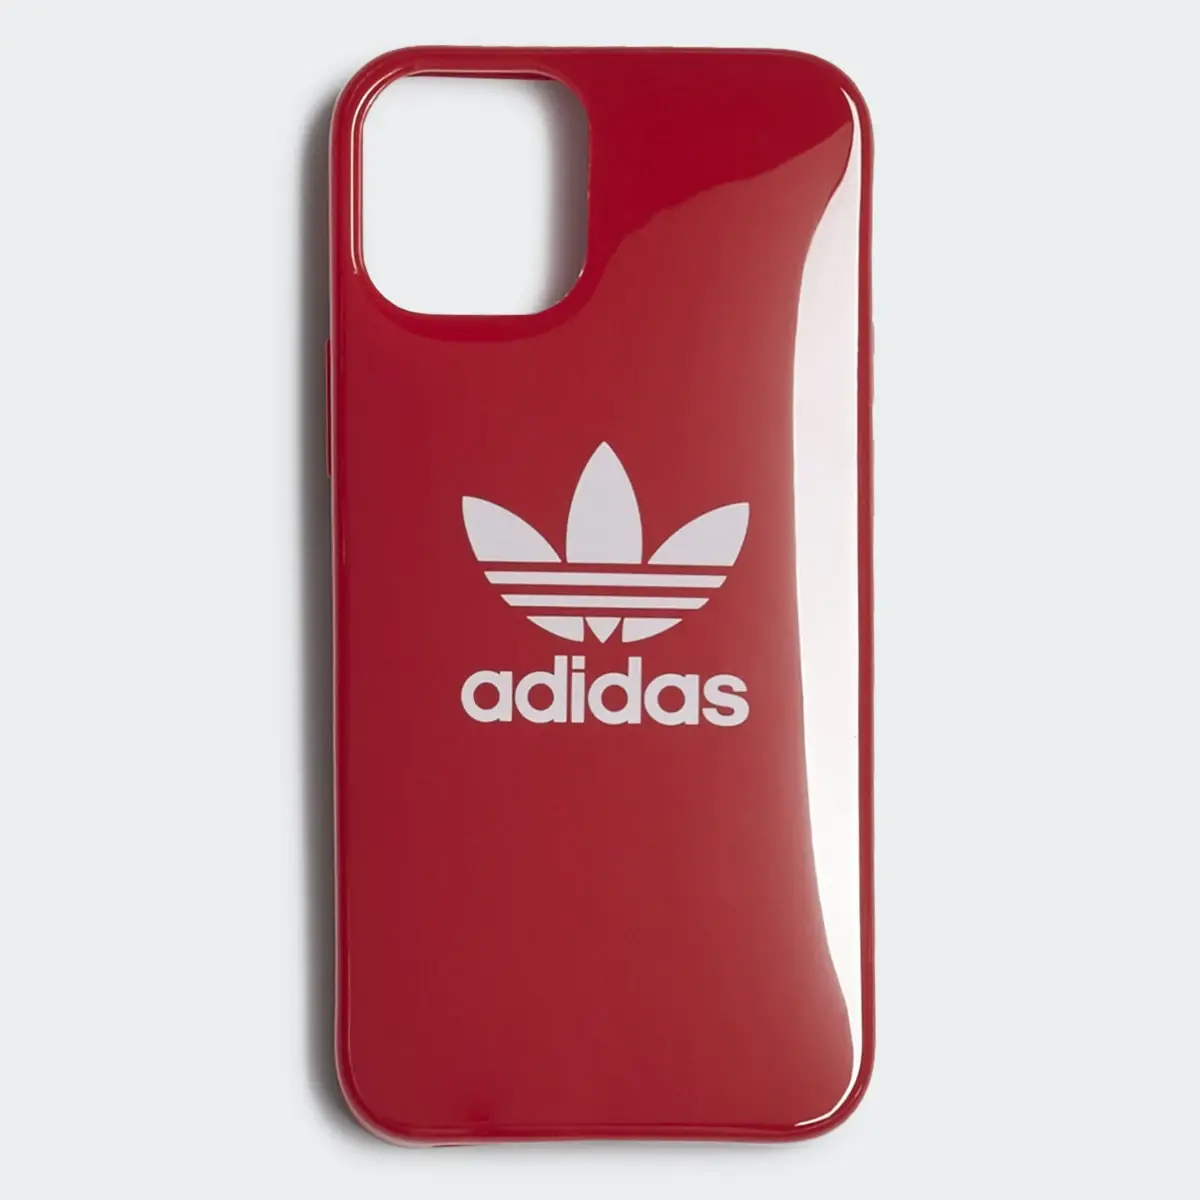 Adidas Moulded Snap for iPhone 12 mini. 1